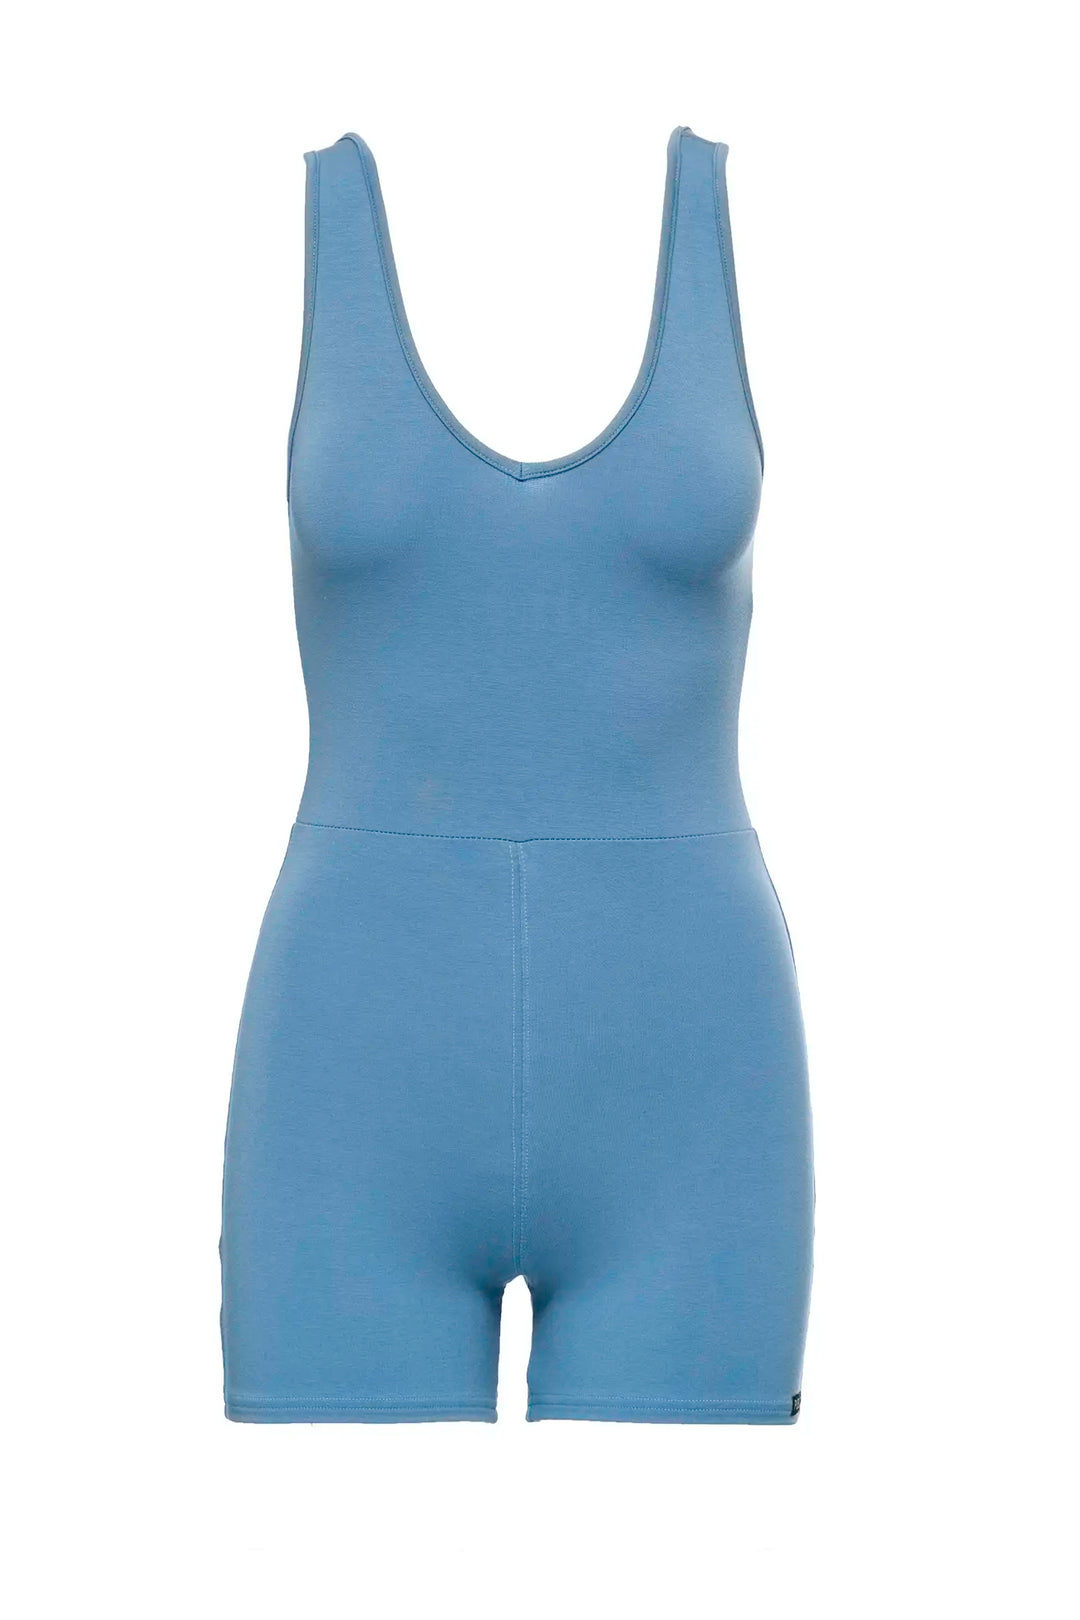 Blue Workout Romper made in Canada